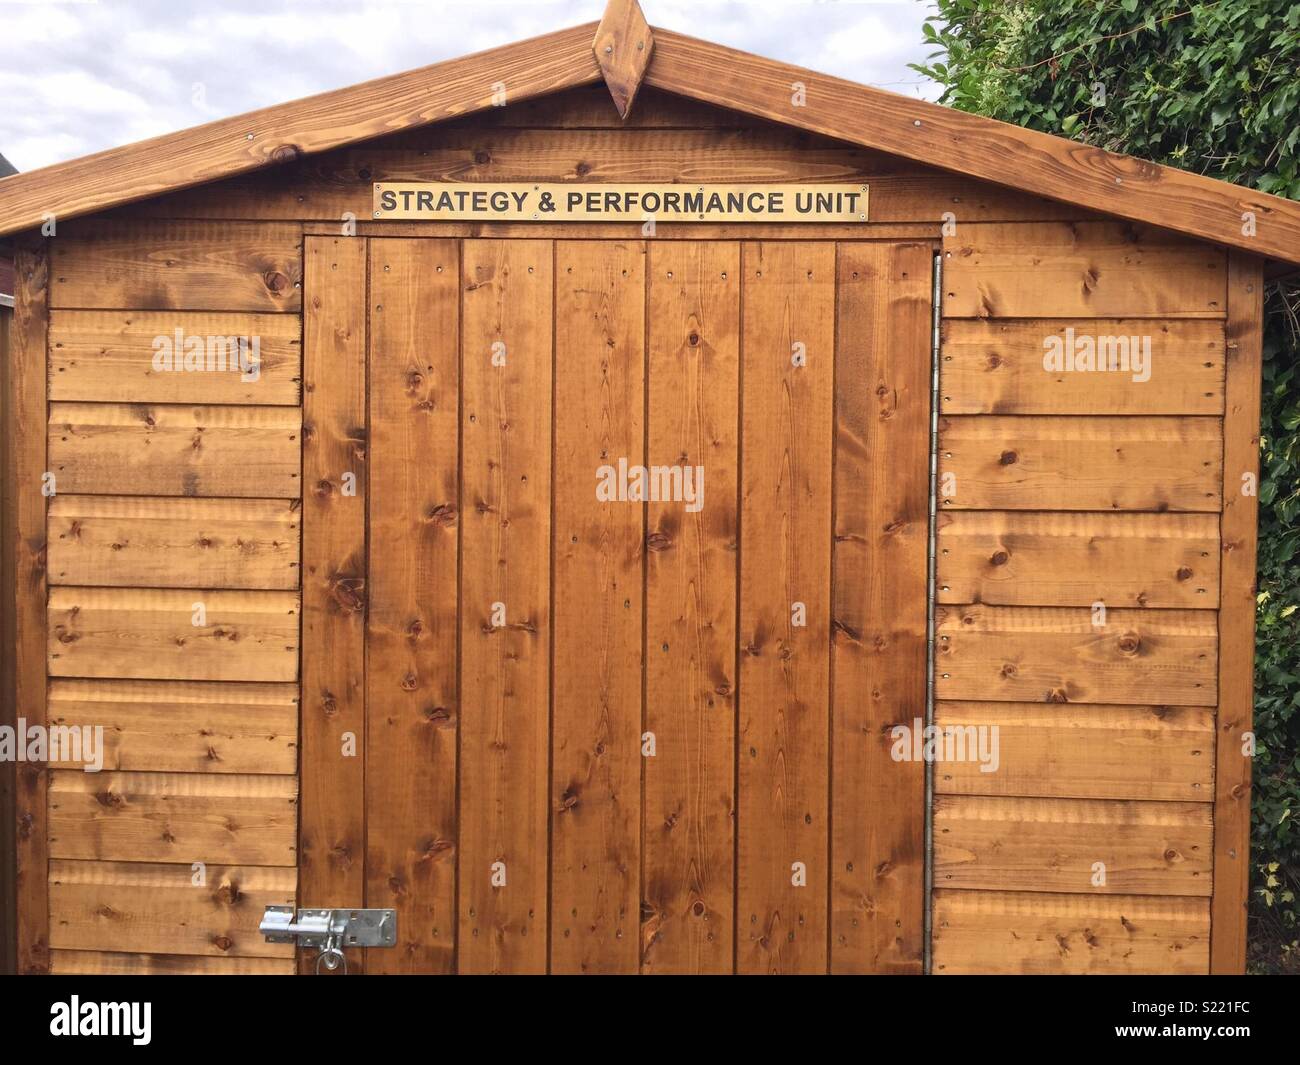 Garden shed strategy unit Stock Photo